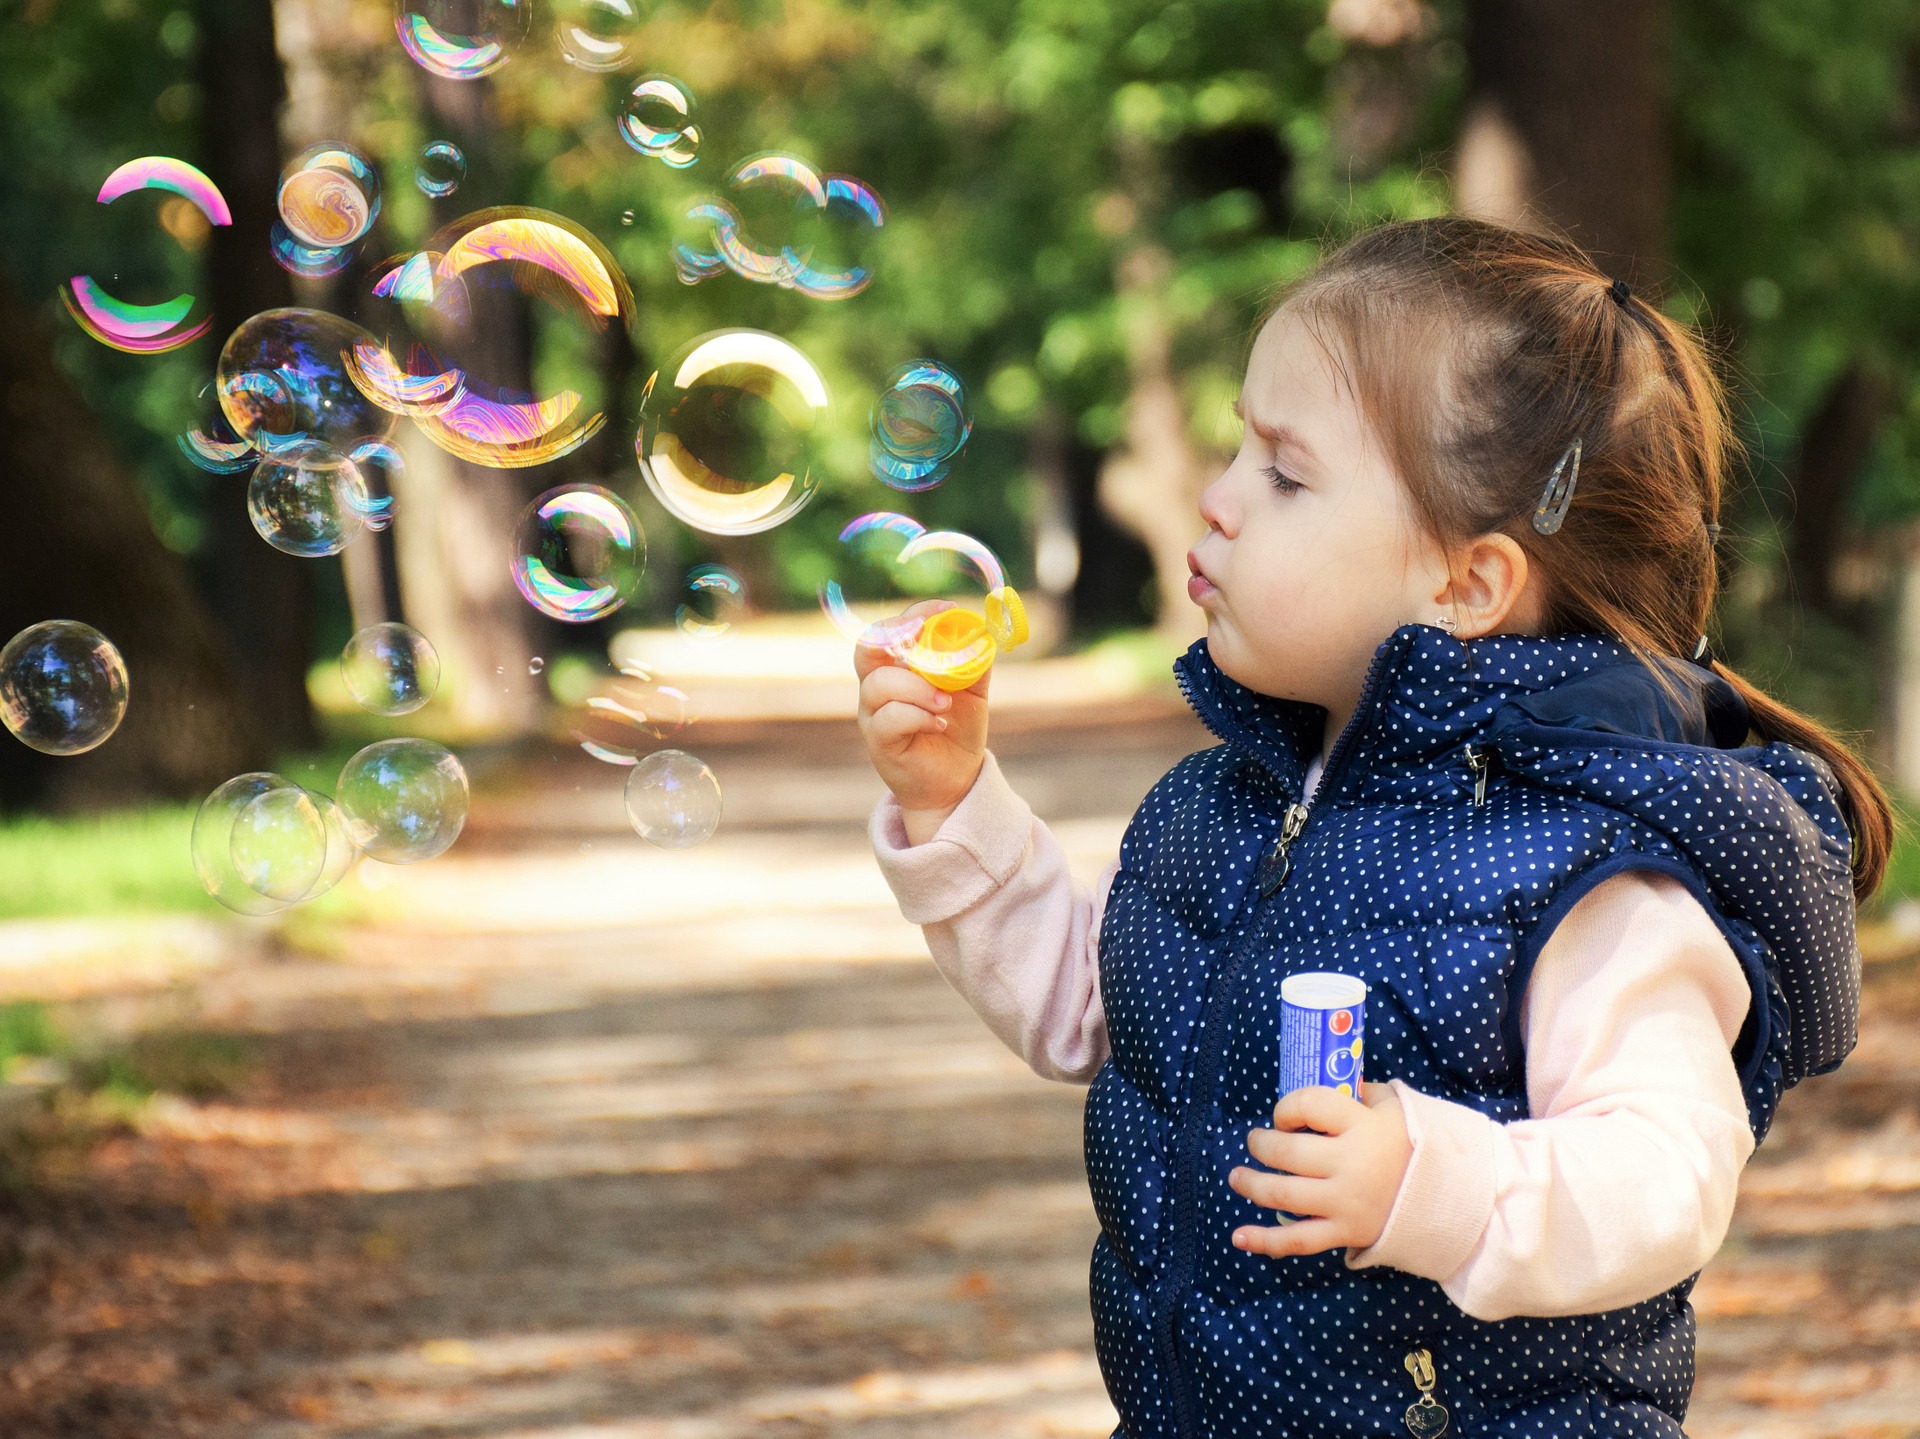 Little girl enjoying a day outdoor blowing bubbles